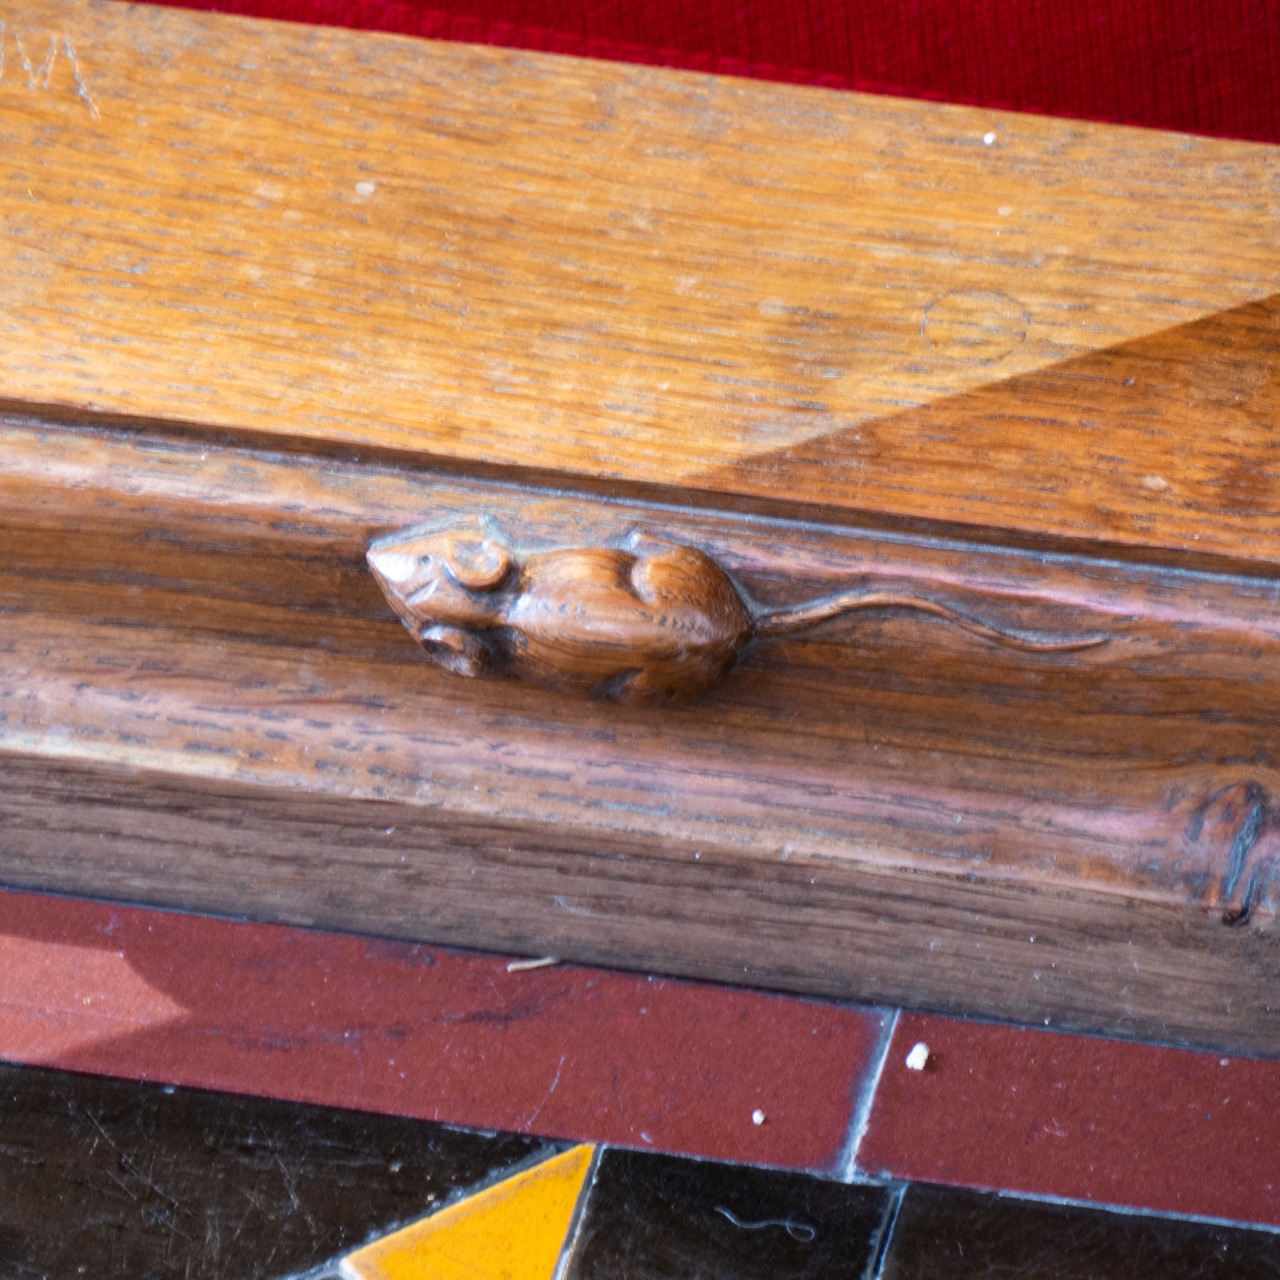 Mouse carving on the altar rails (Robert “Mousey” Thompson’s trademark, 1960)